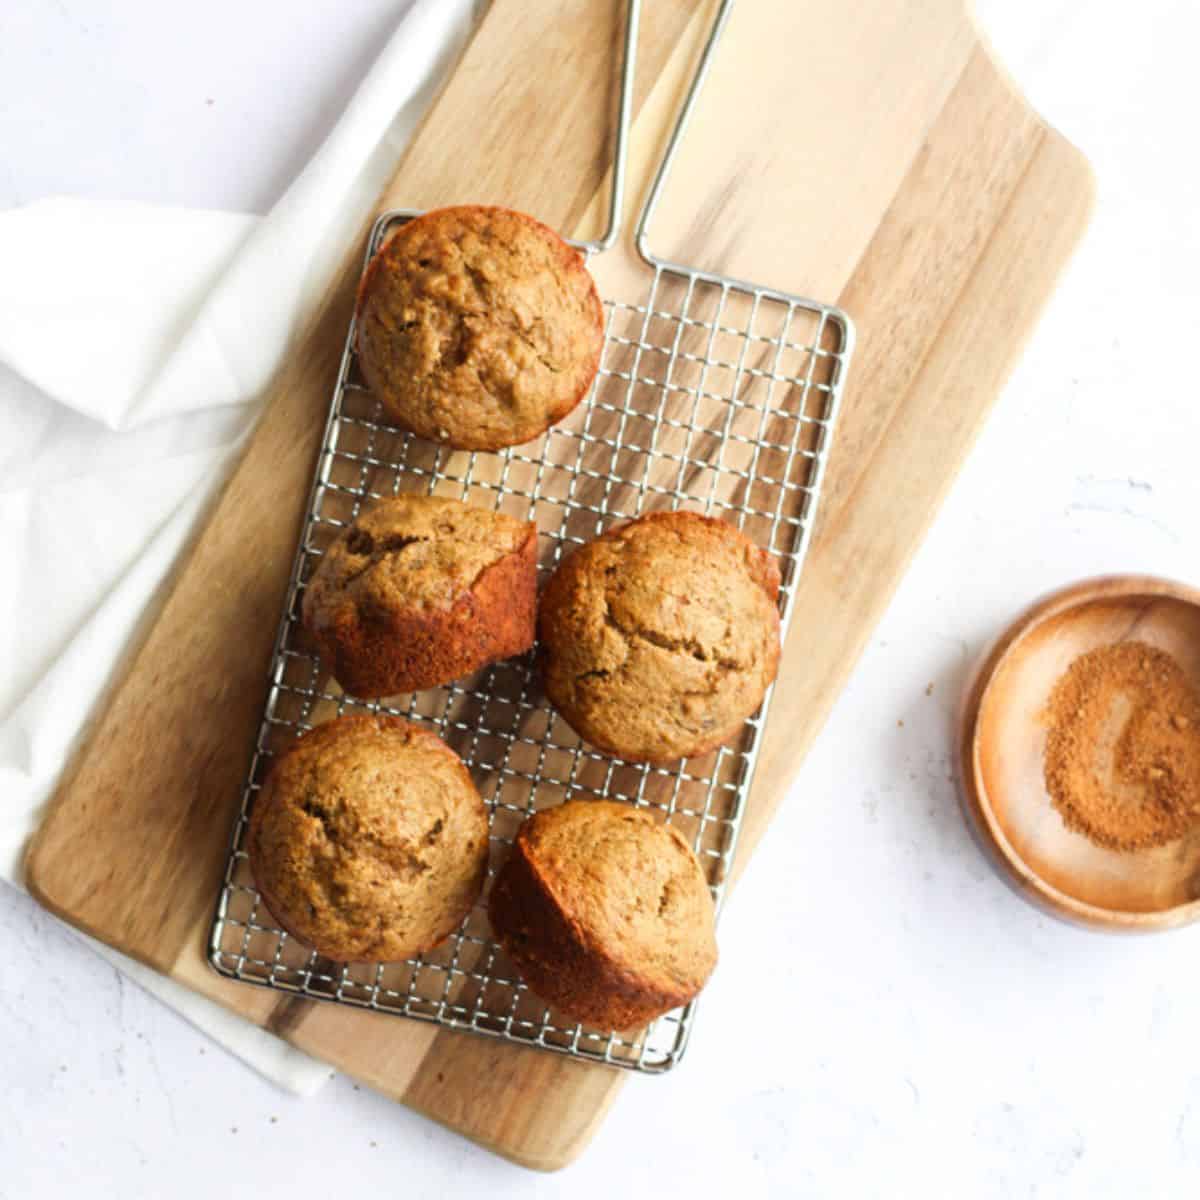 5 ingredient banana bread muffins on a wooden cutting board.